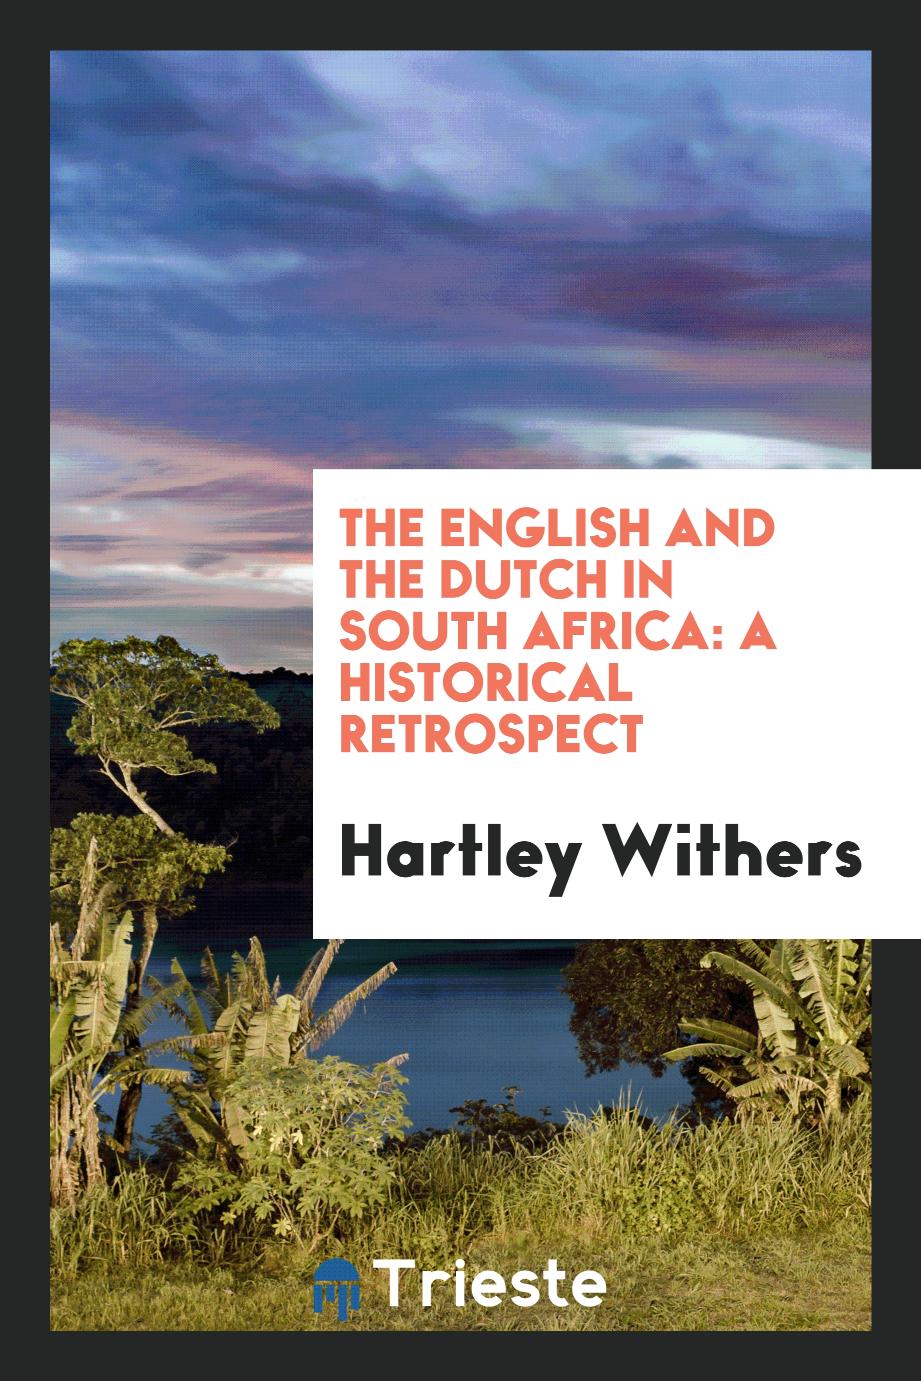 The English and the Dutch in South Africa: a historical retrospect